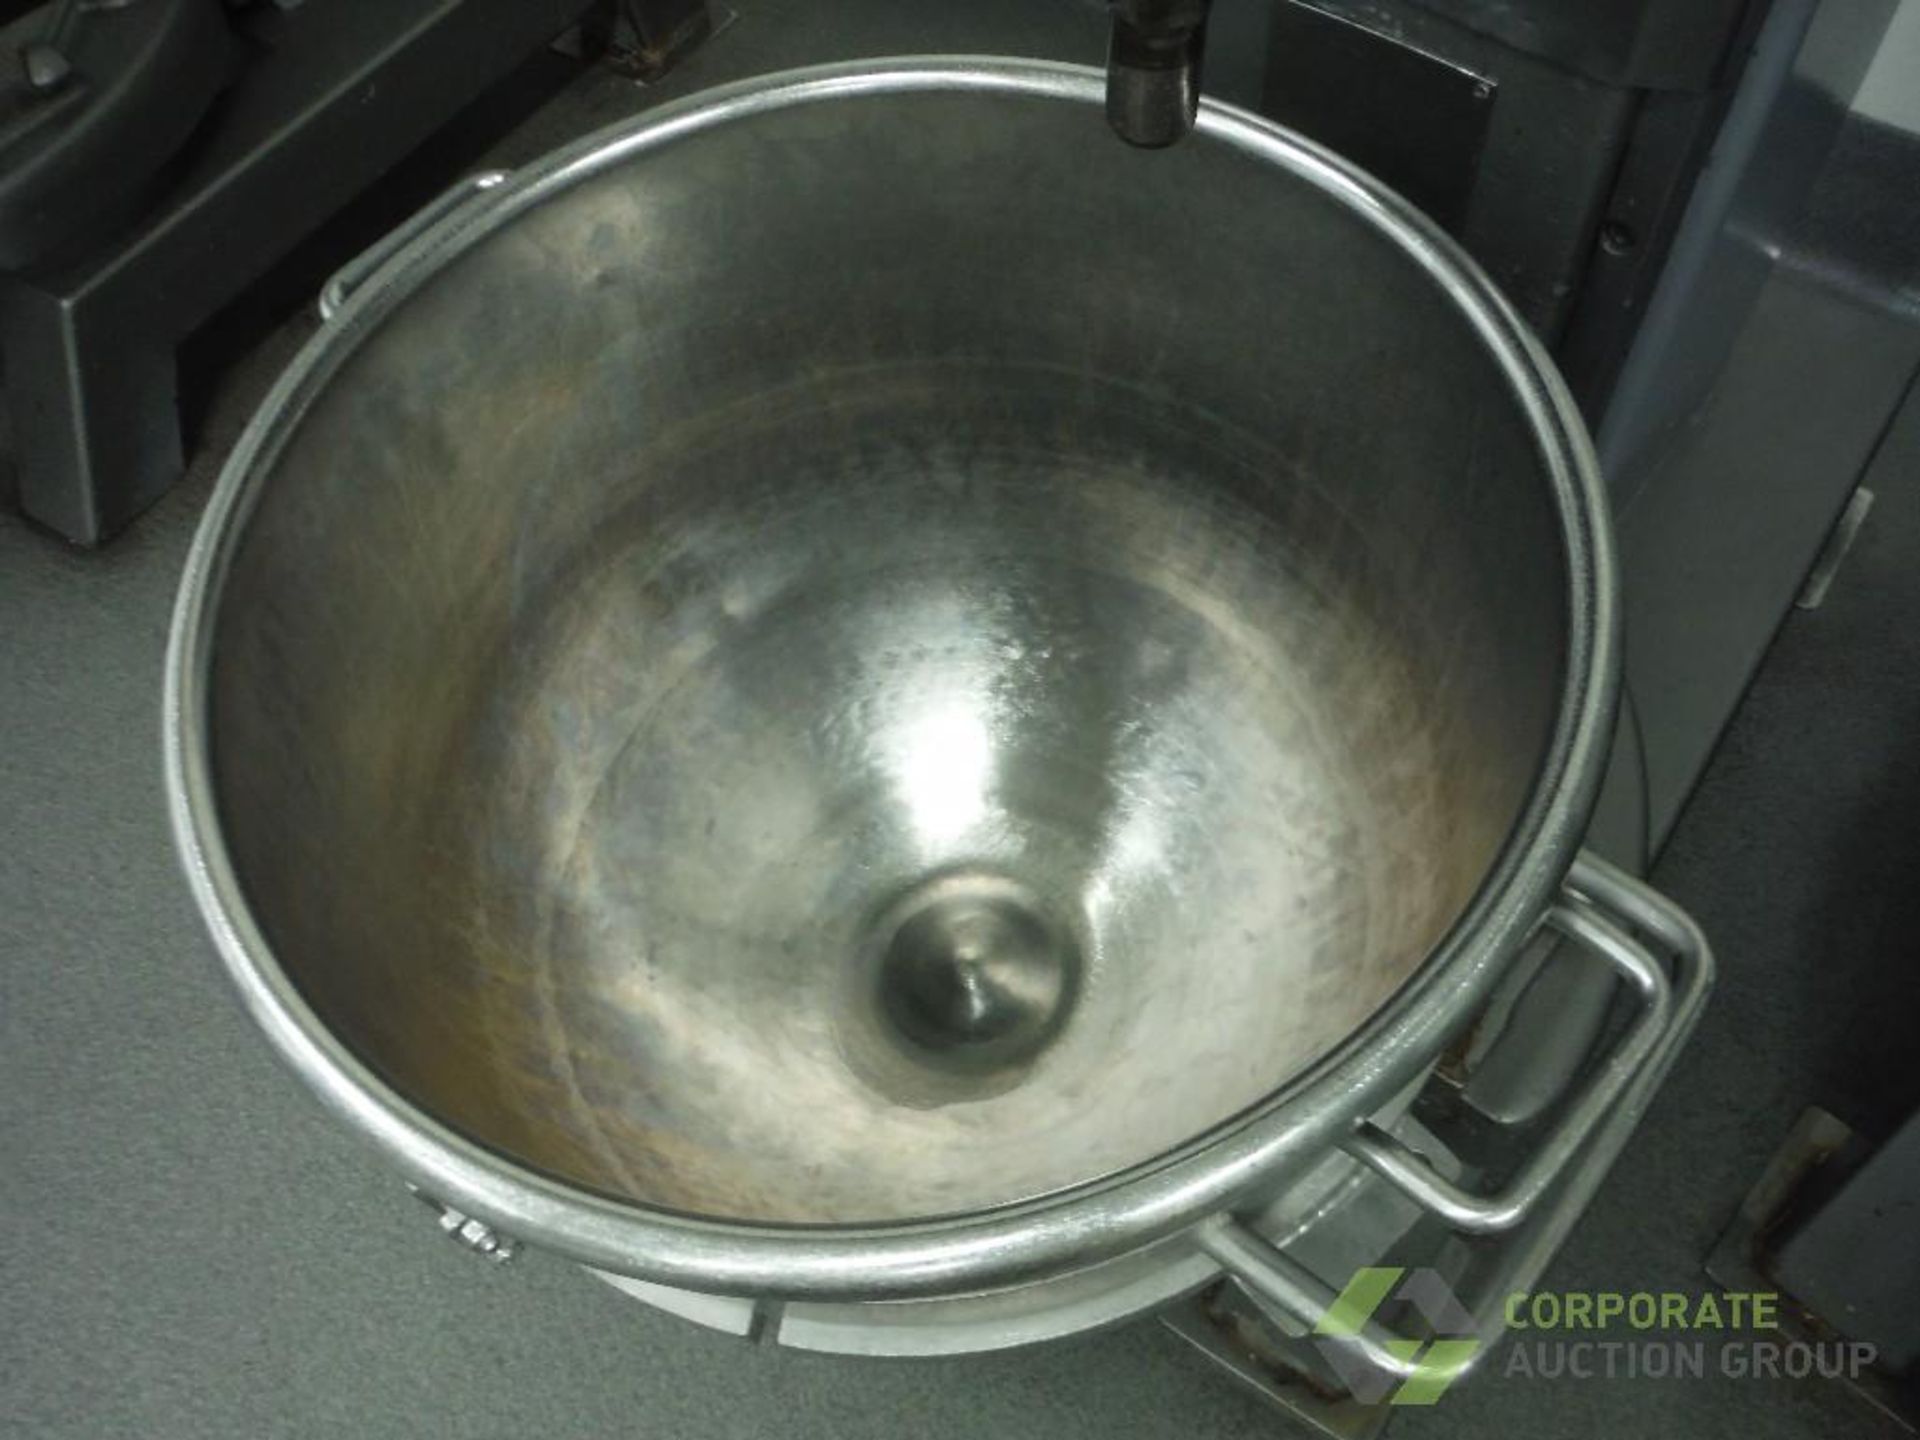 Hobart 80 qt. mixer, Model L 800, SN 11-351-008, with SS bowl, dolly - Image 4 of 8